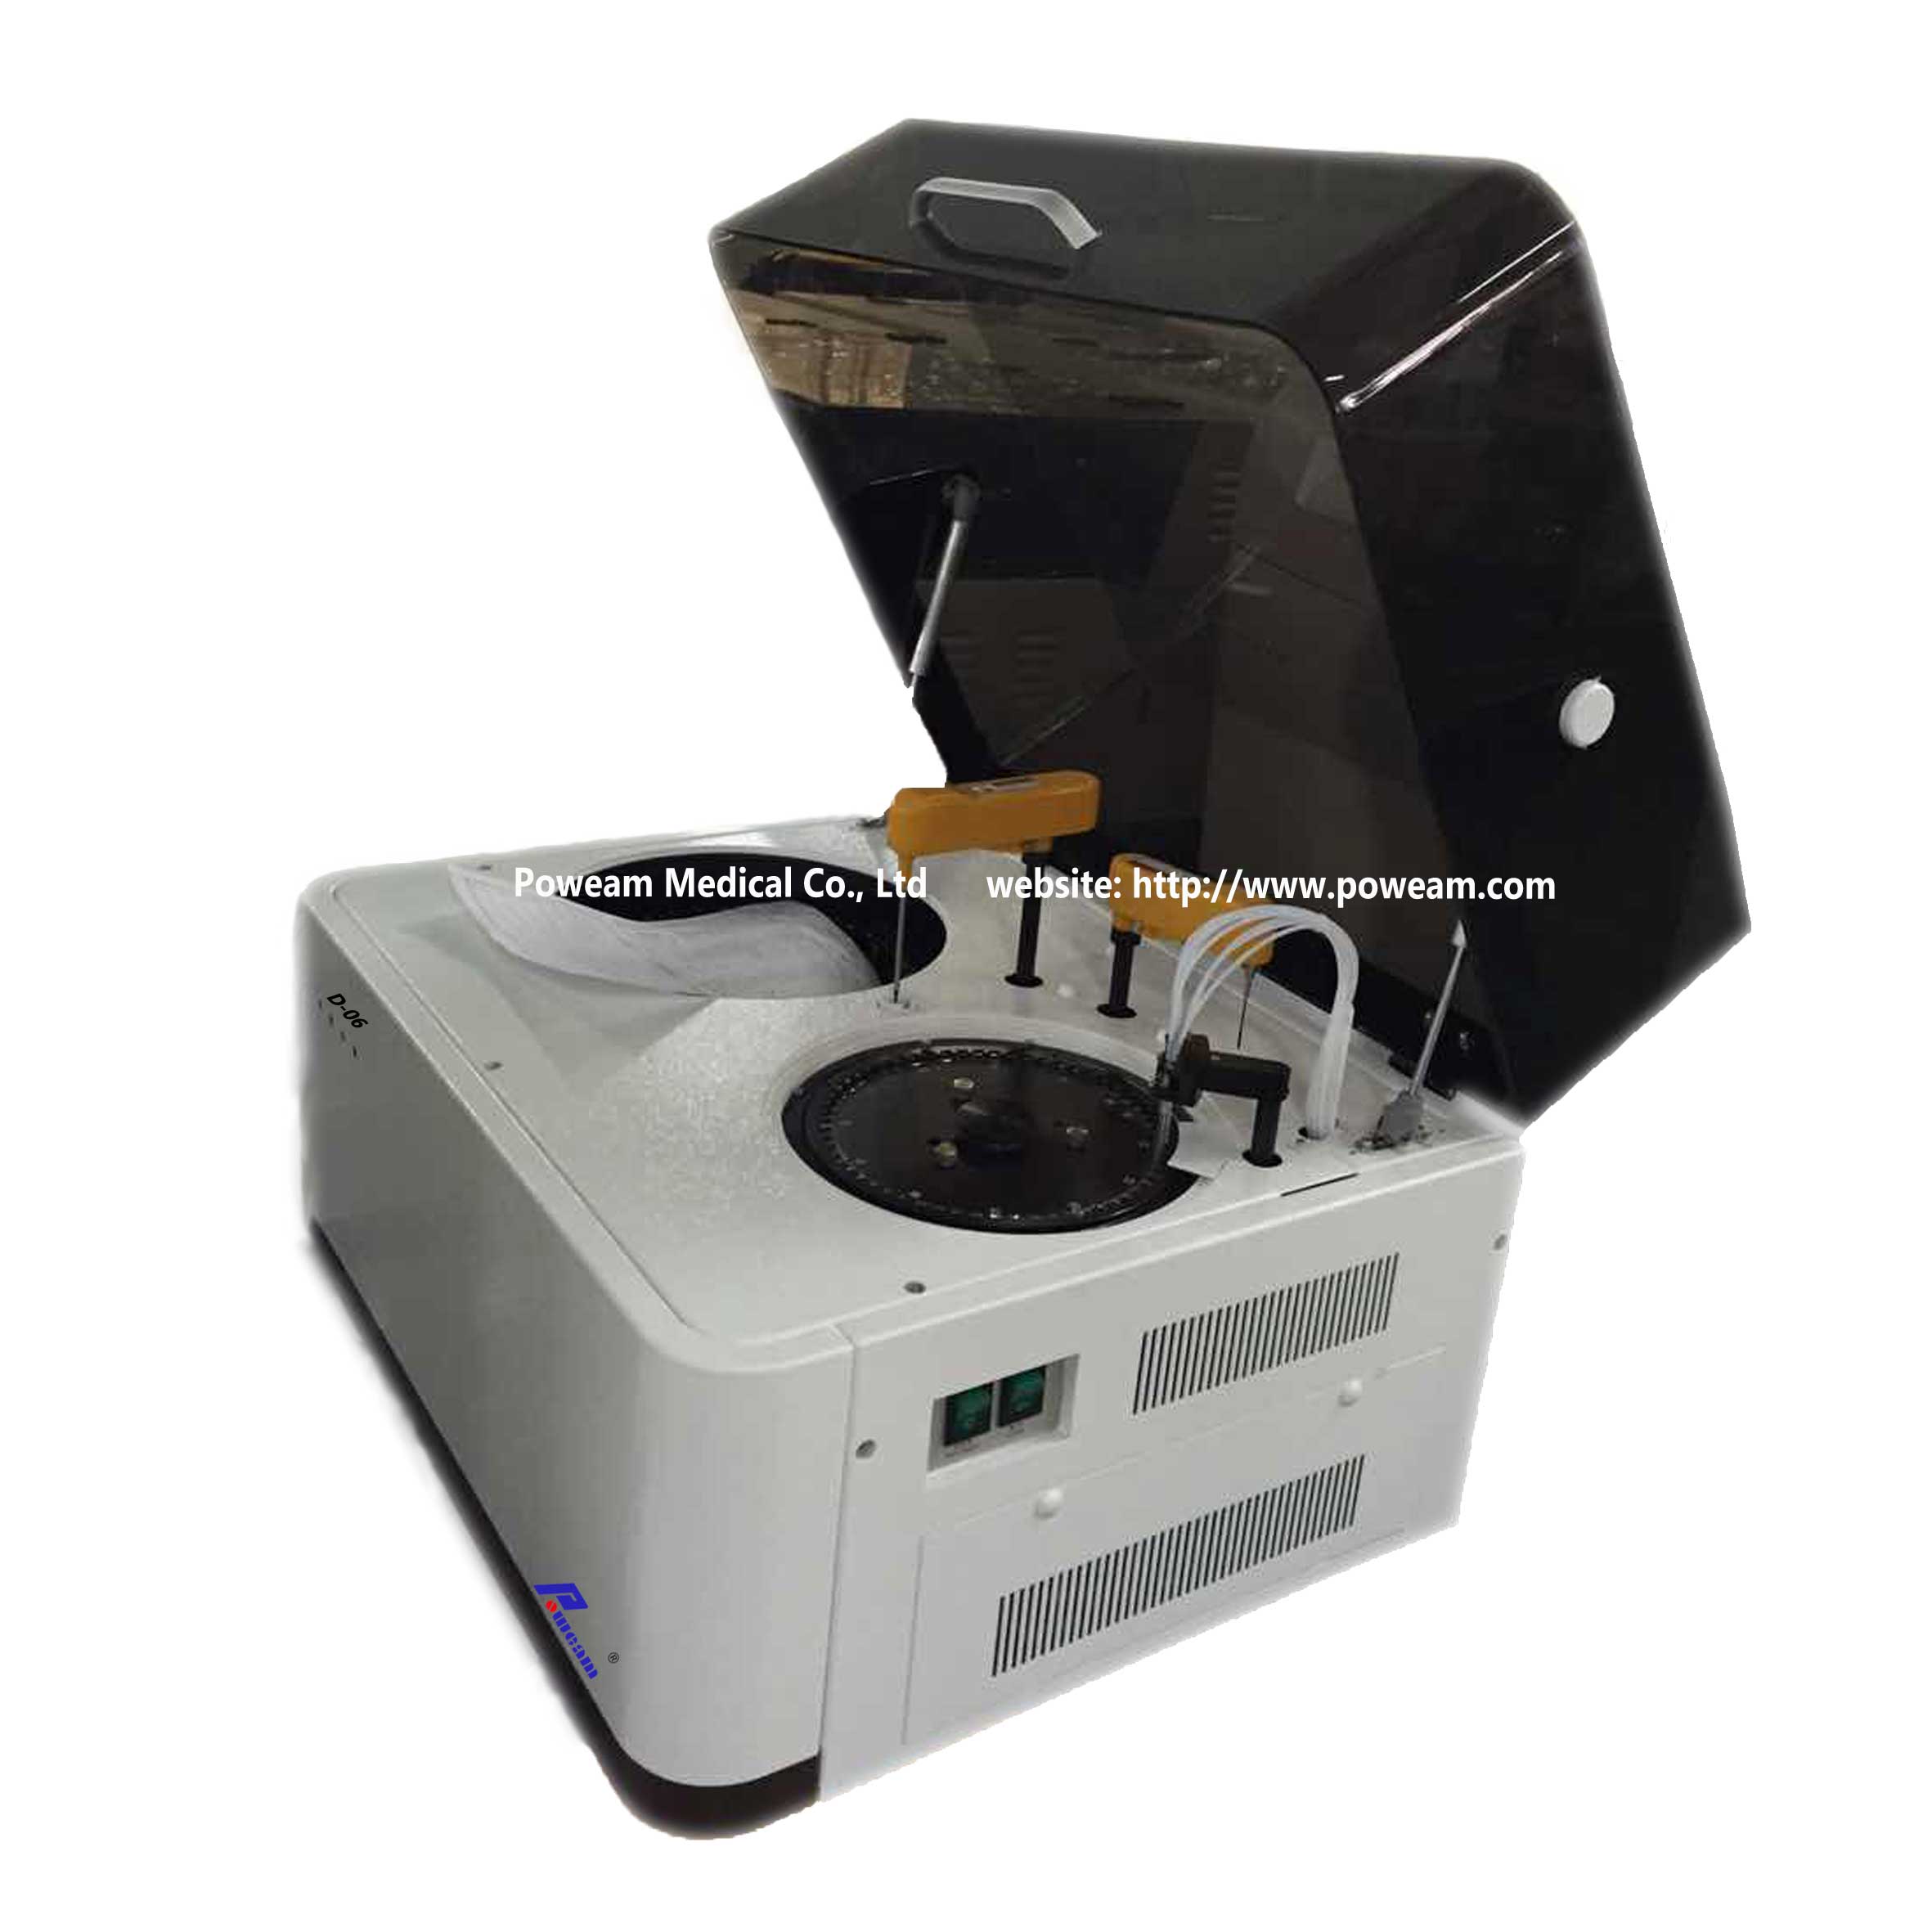 China Cheap Fully Automatic Chemistry Analyzer with 120 Tests/Hour